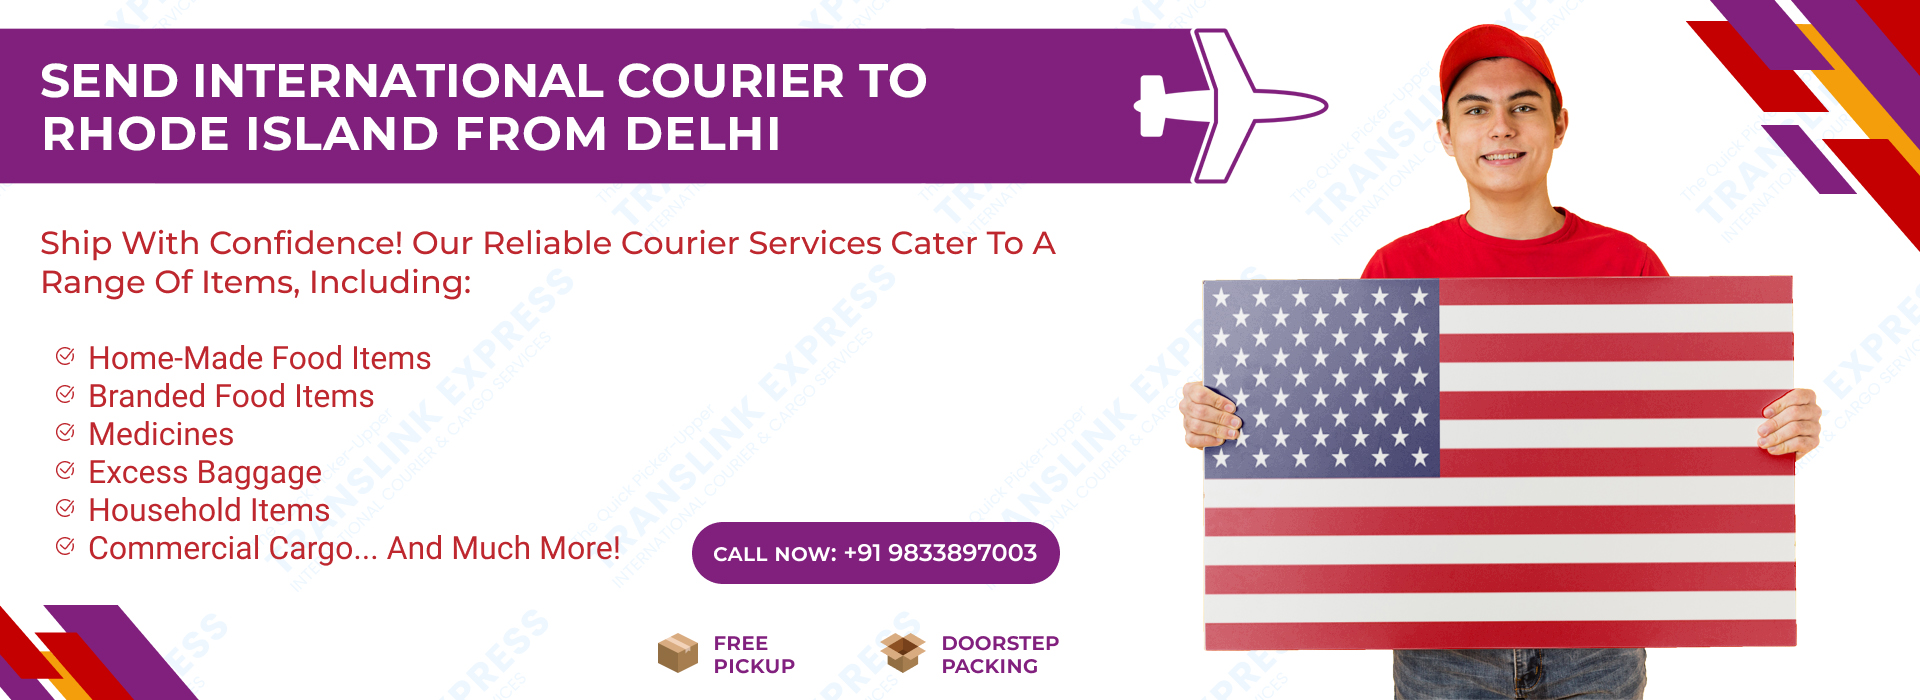 Courier to Rhode Island From Delhi